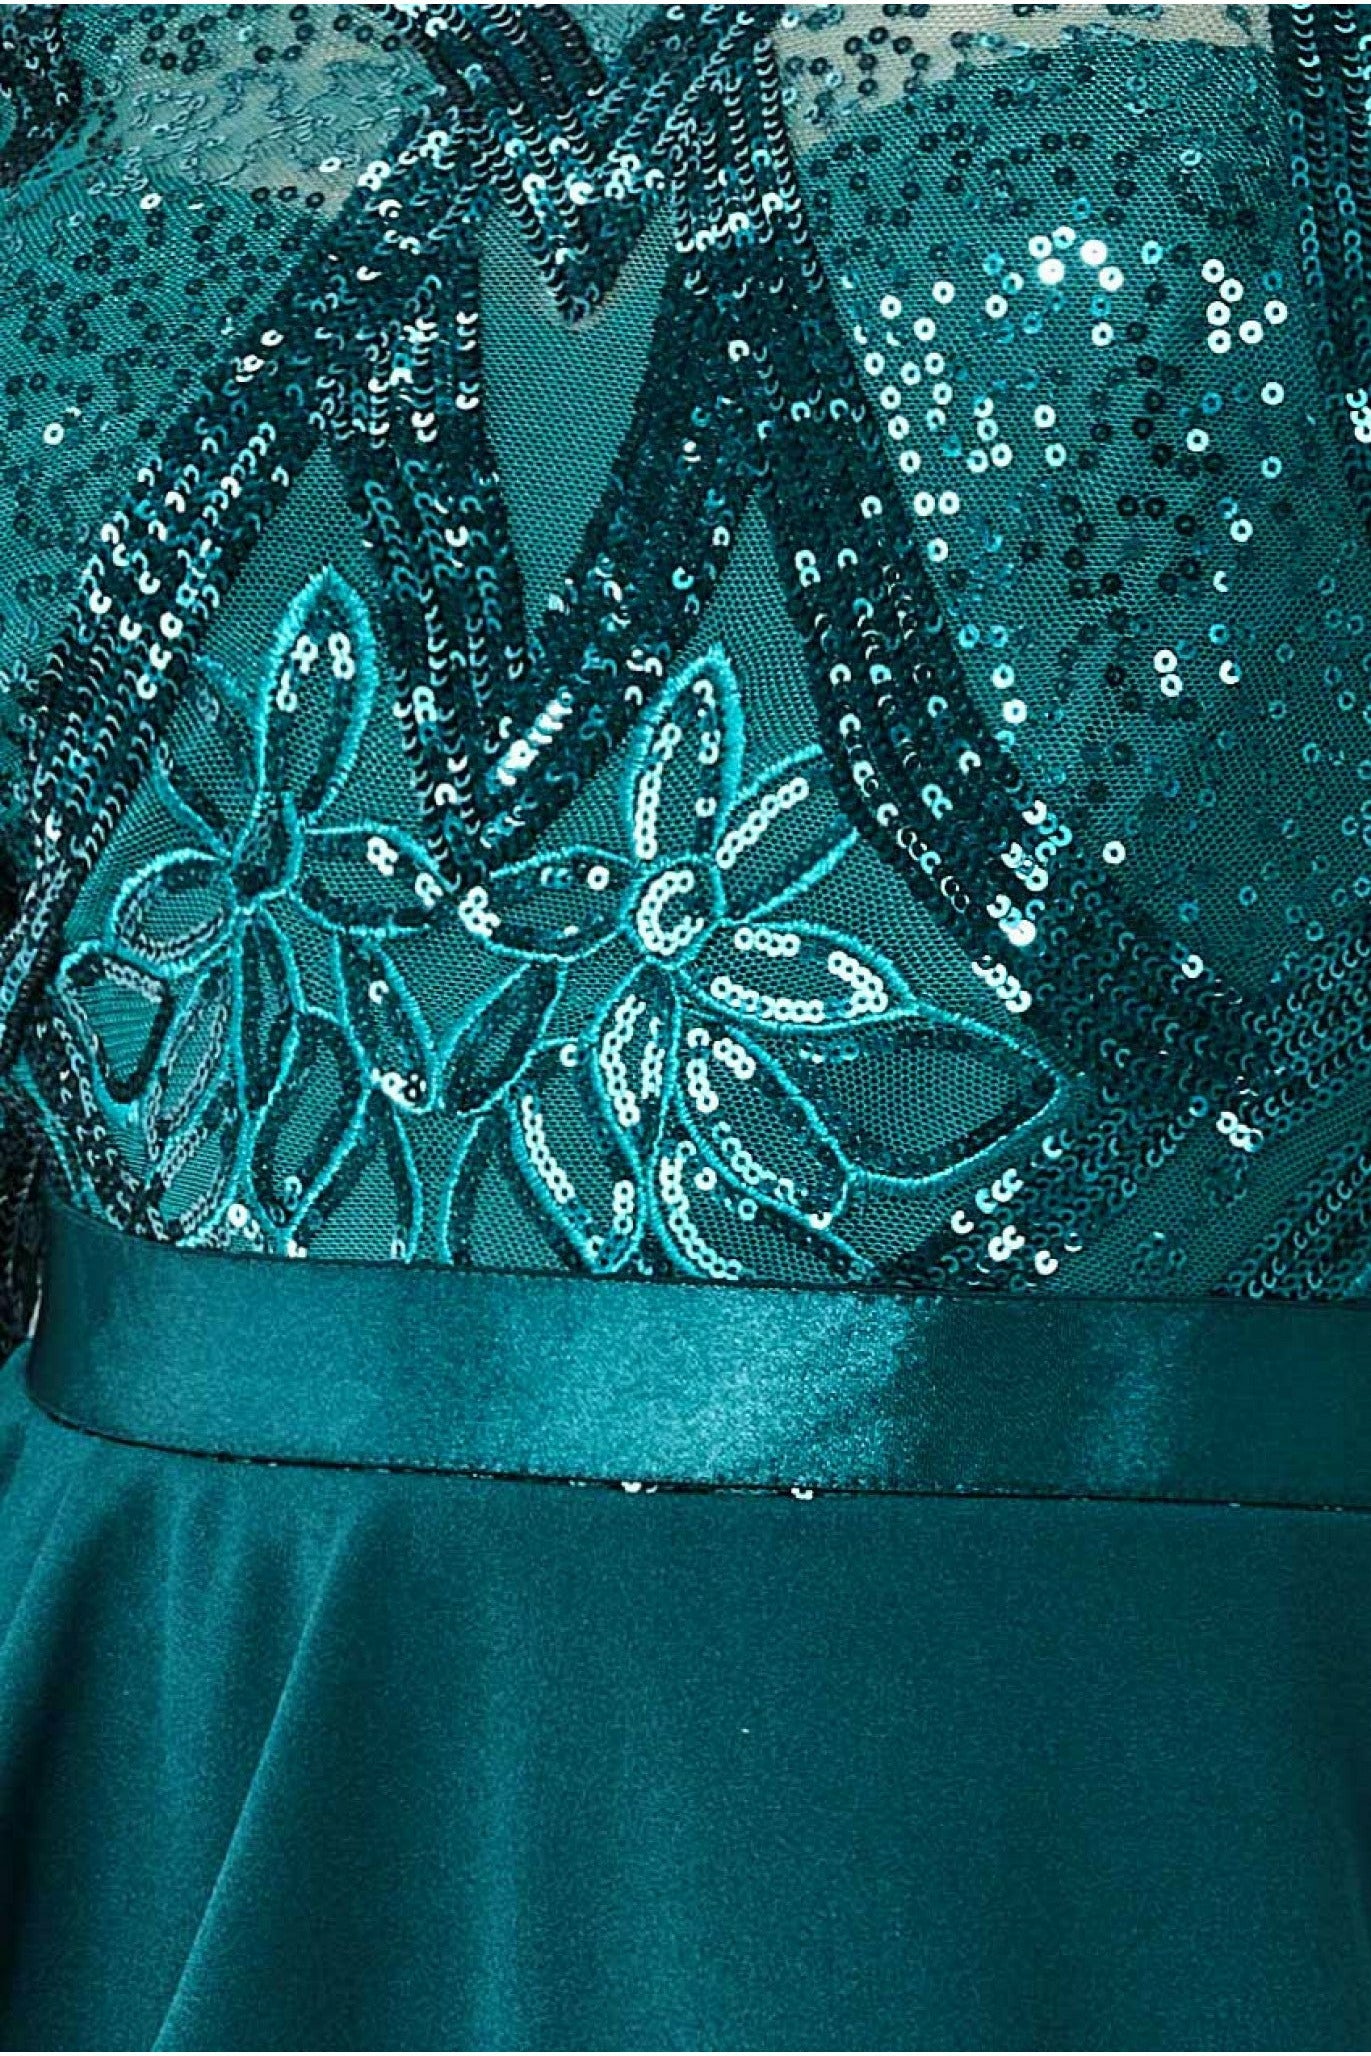 Sequin Bodice With Front Frill Maxi - Emerald DR3232